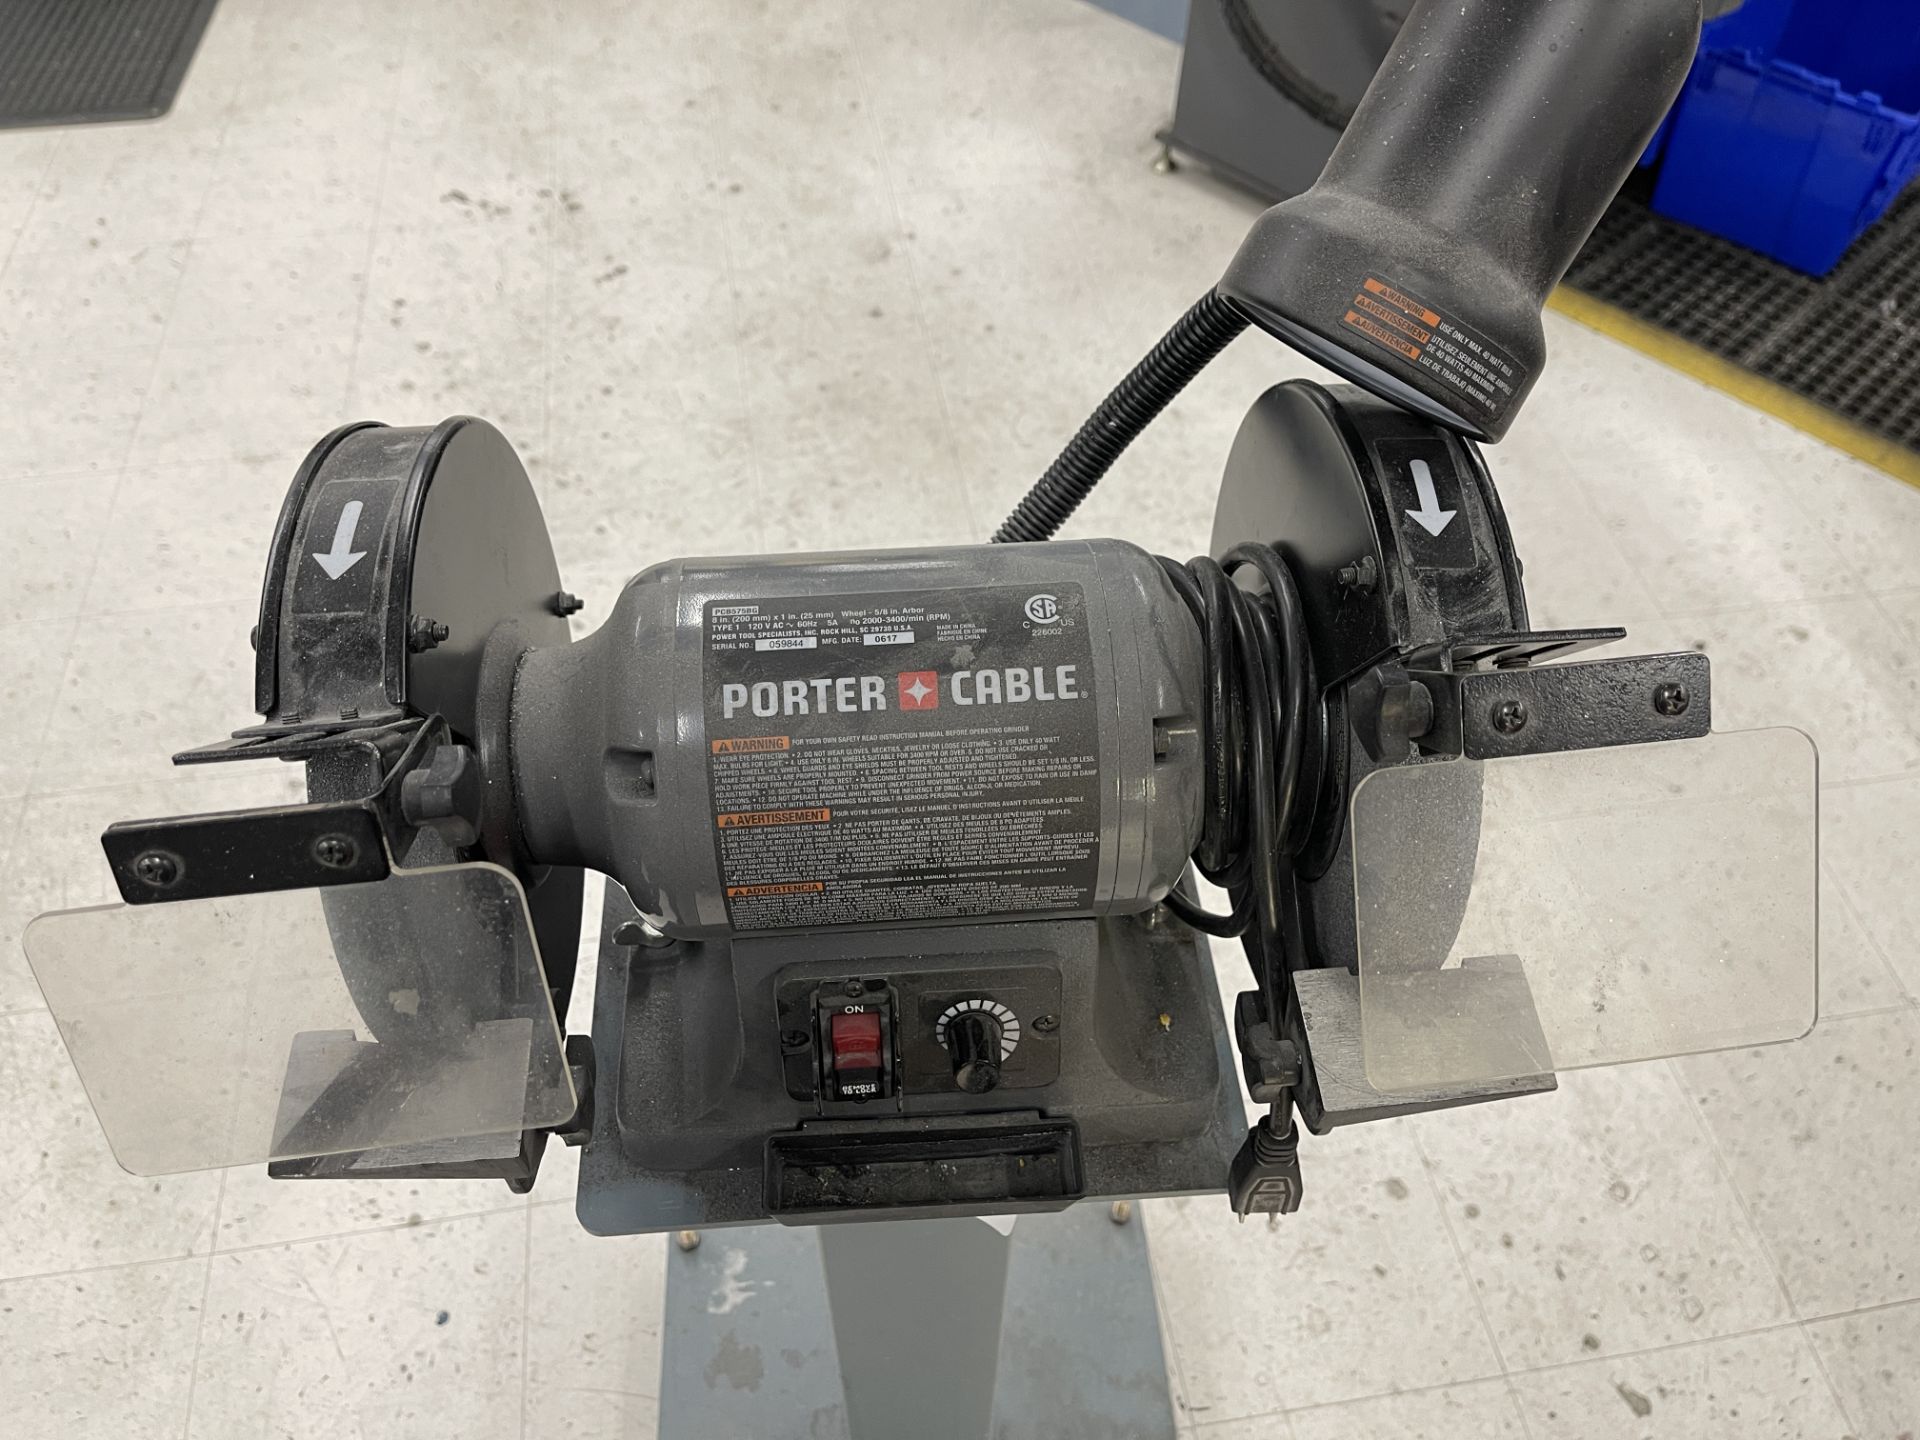 PORTER CABLE Grinder with stand Model PCB575BG - Image 2 of 2